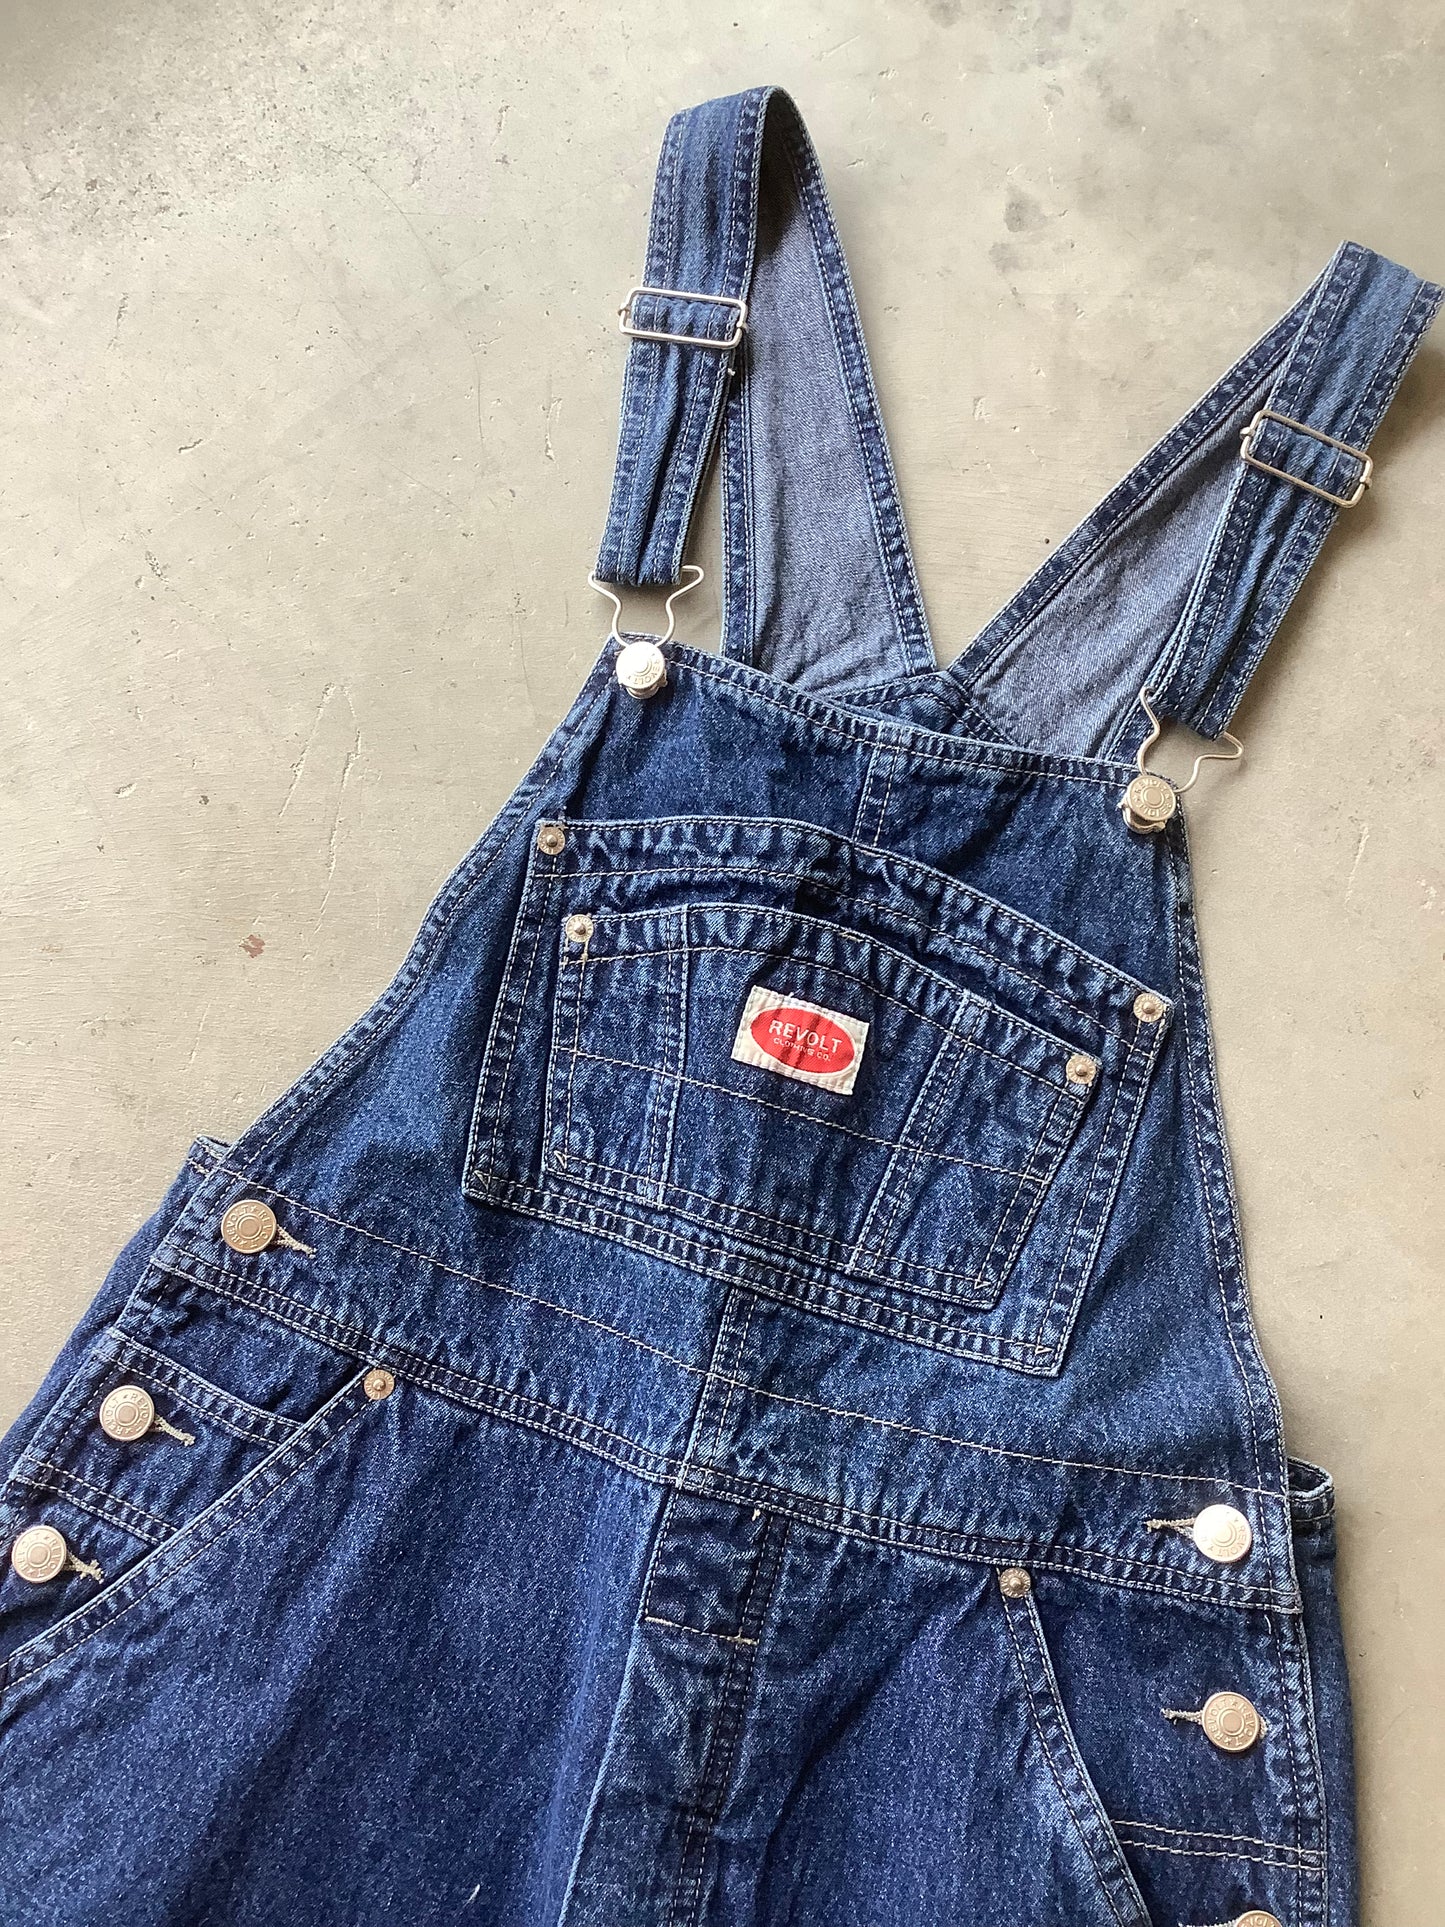 90s overalls with ribbon detail